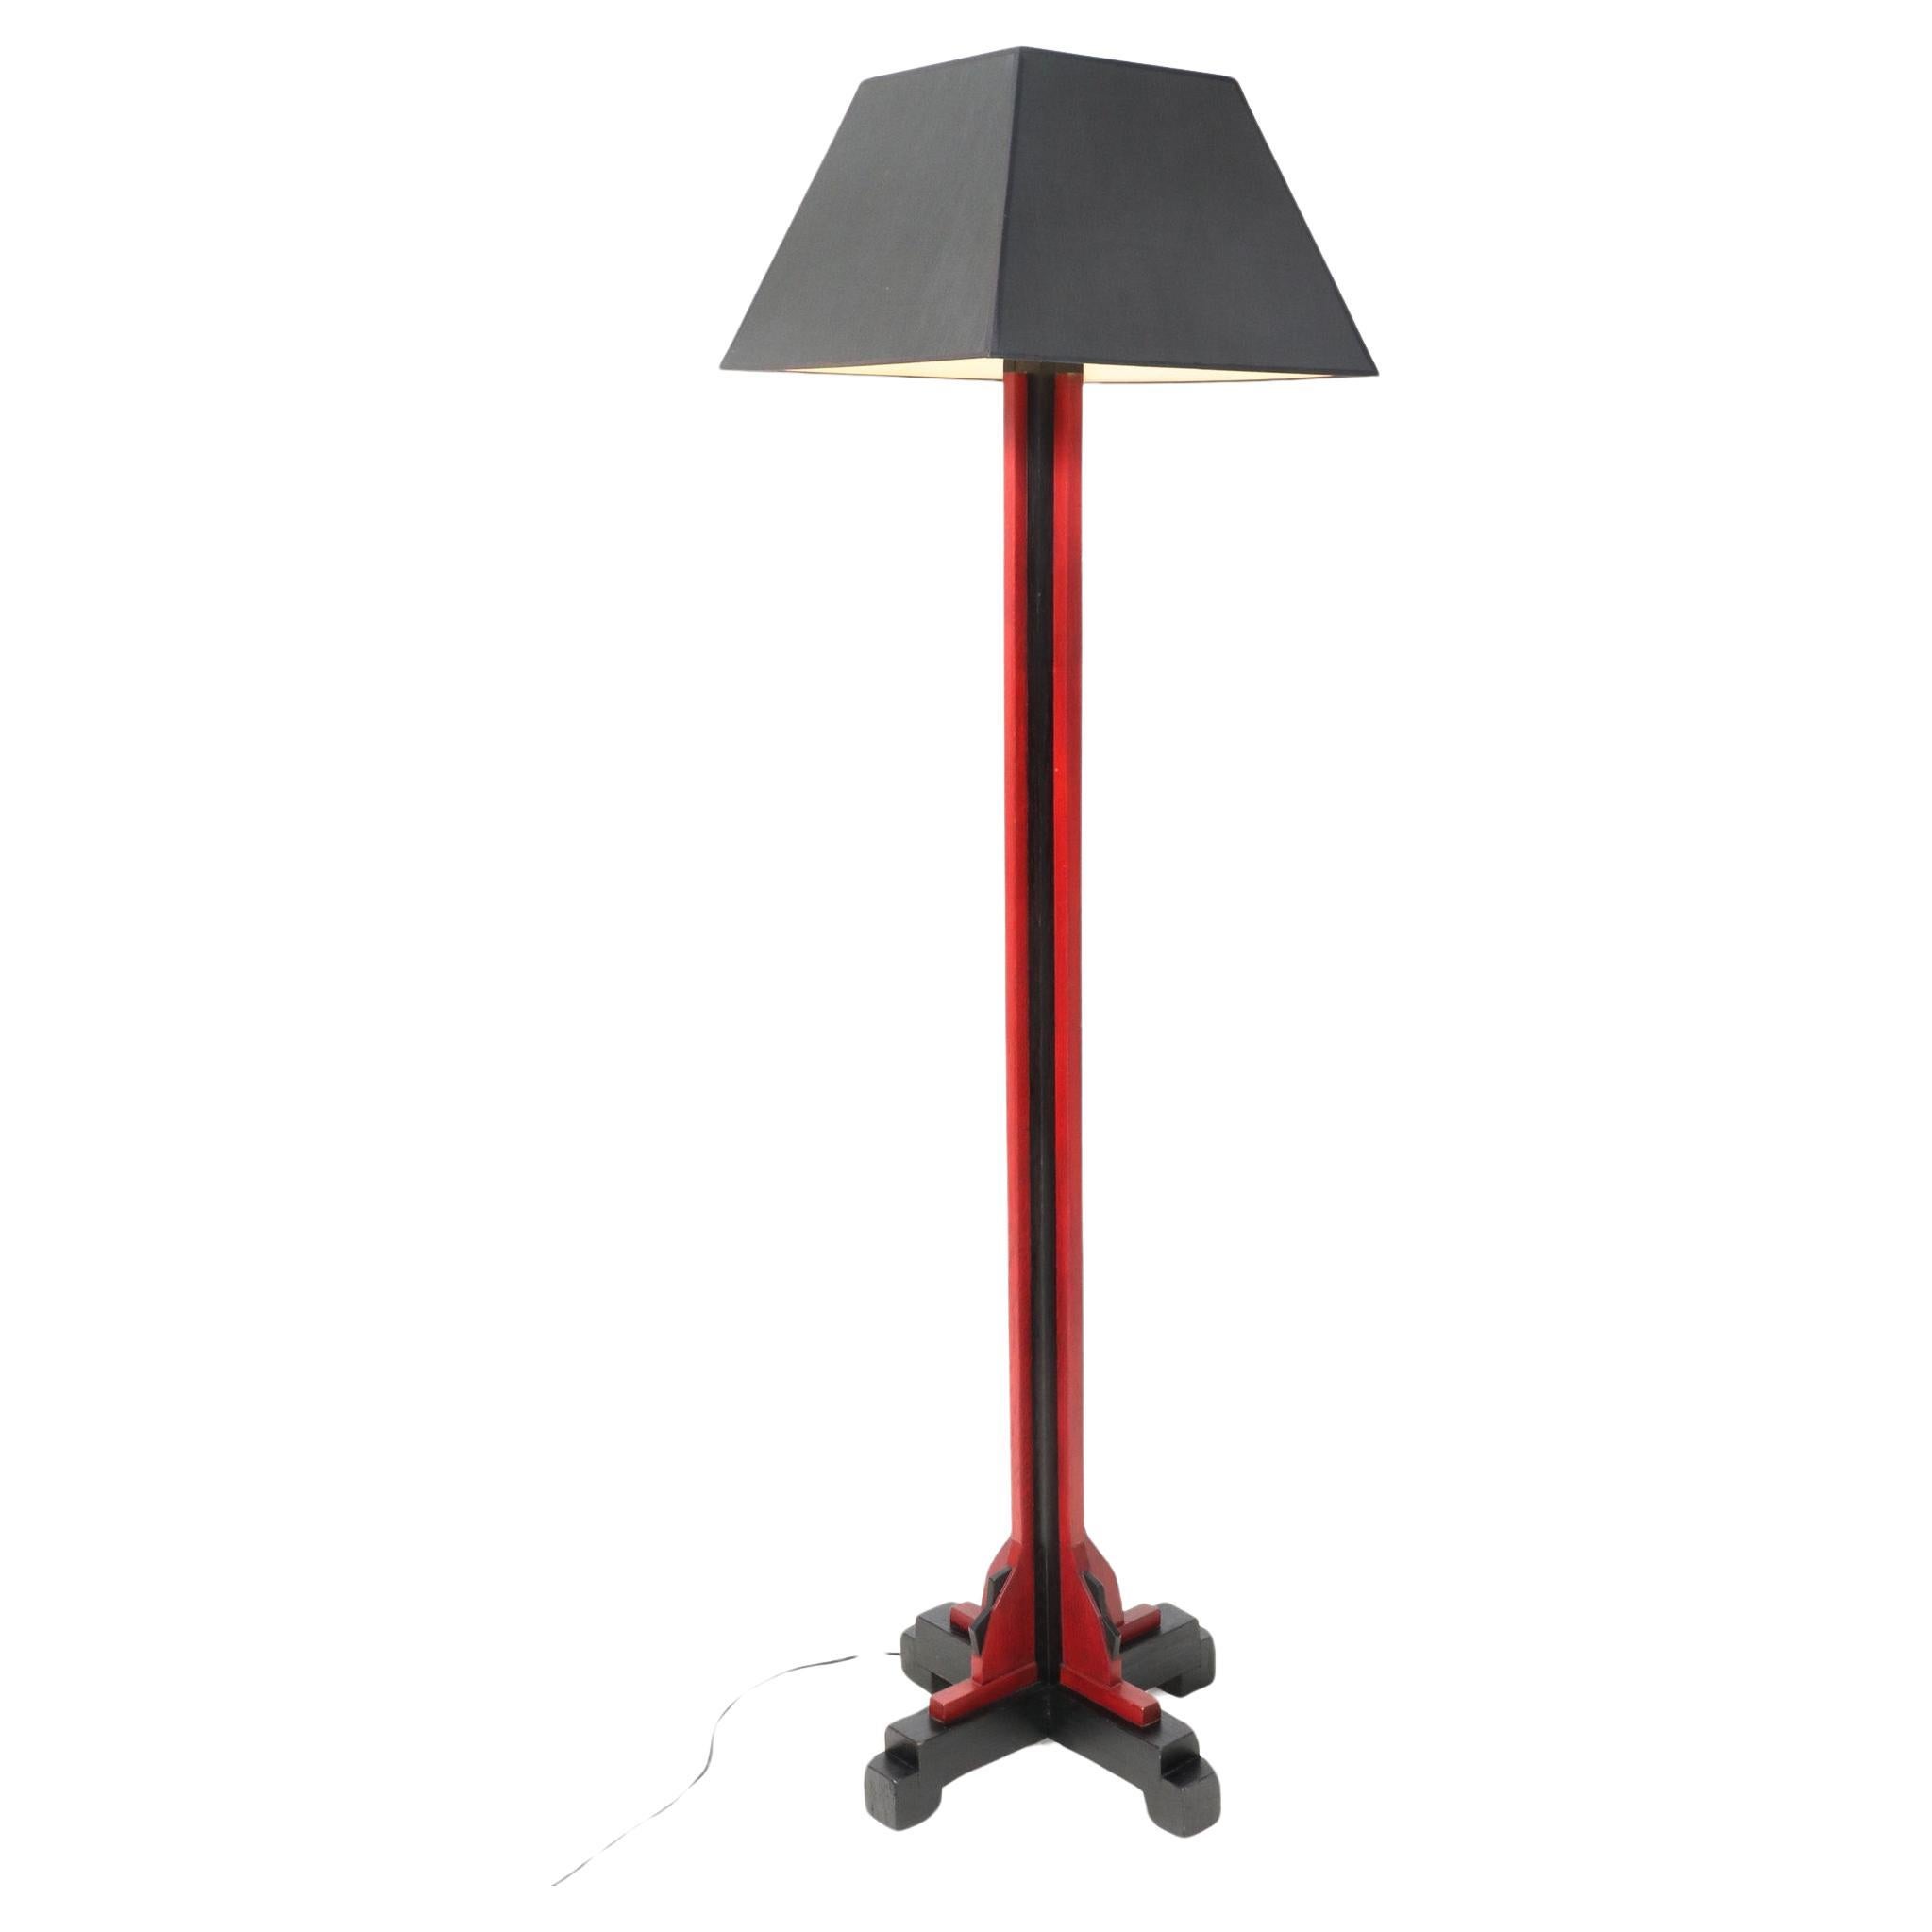 Lacquered Oak Art Deco Modernist Floor Lamp by Cor Alons, 1920s For Sale